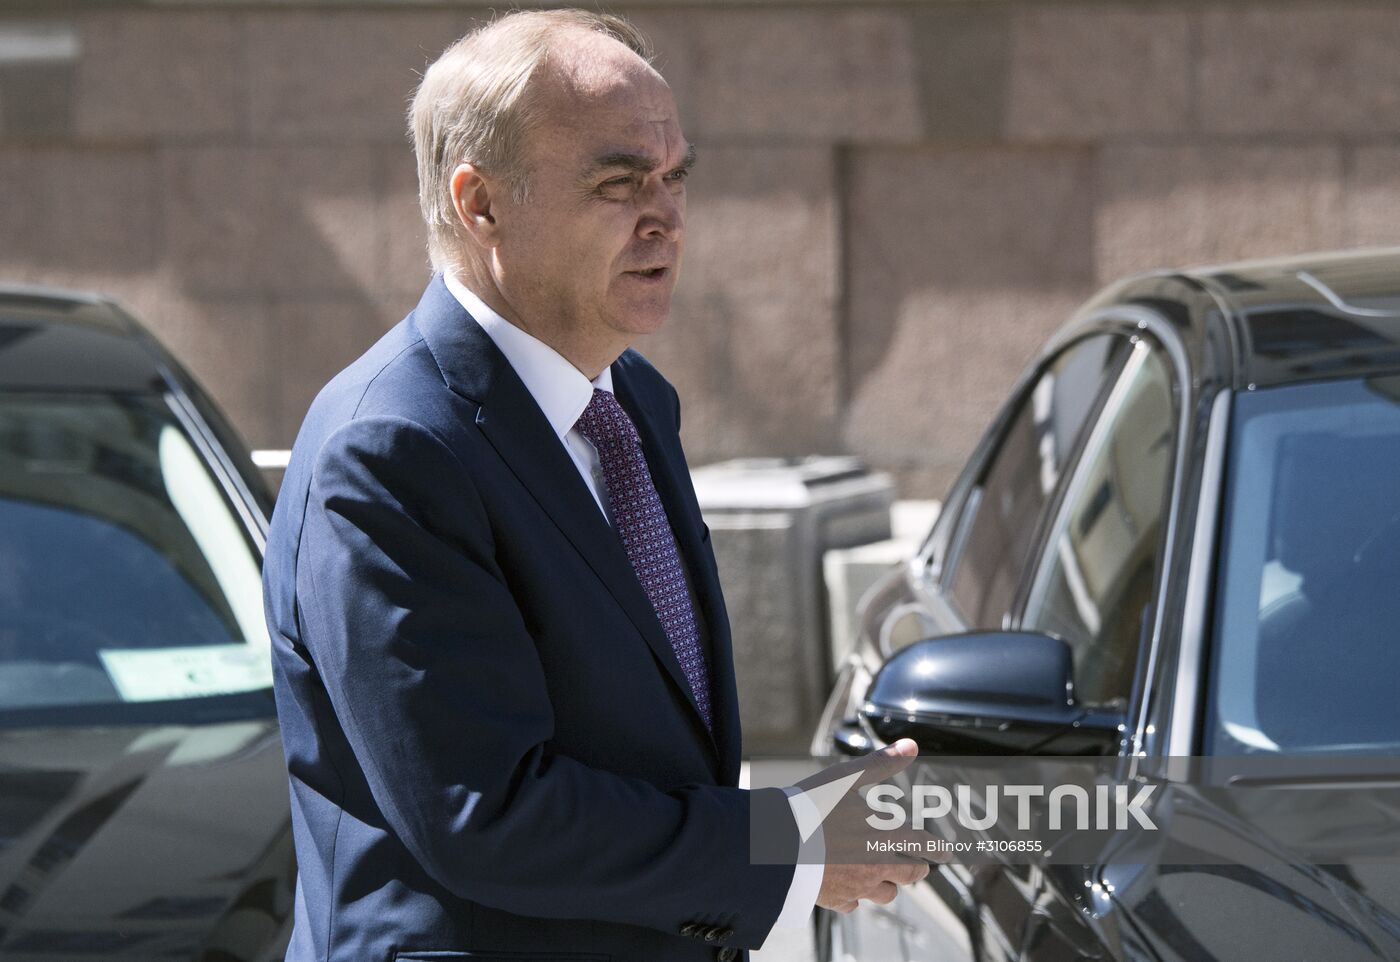 Federation Council considers Anatoly Antonov for position of Russian ambassador to the US